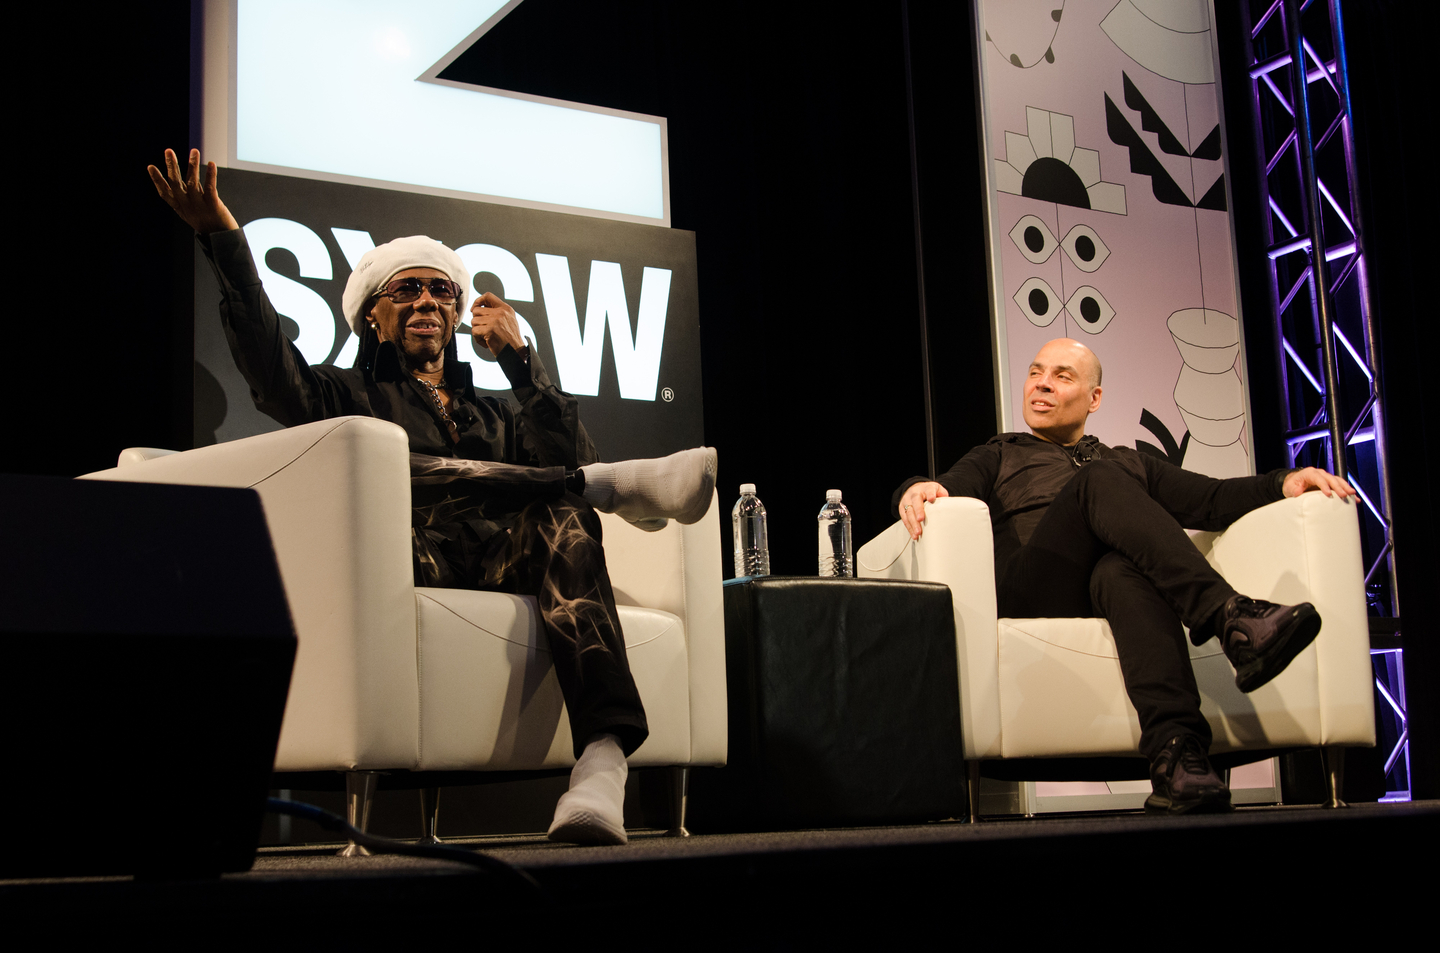 Nile Rodgers and Merck Mercuriadis at their Featured Session – Photo by Karla Reina